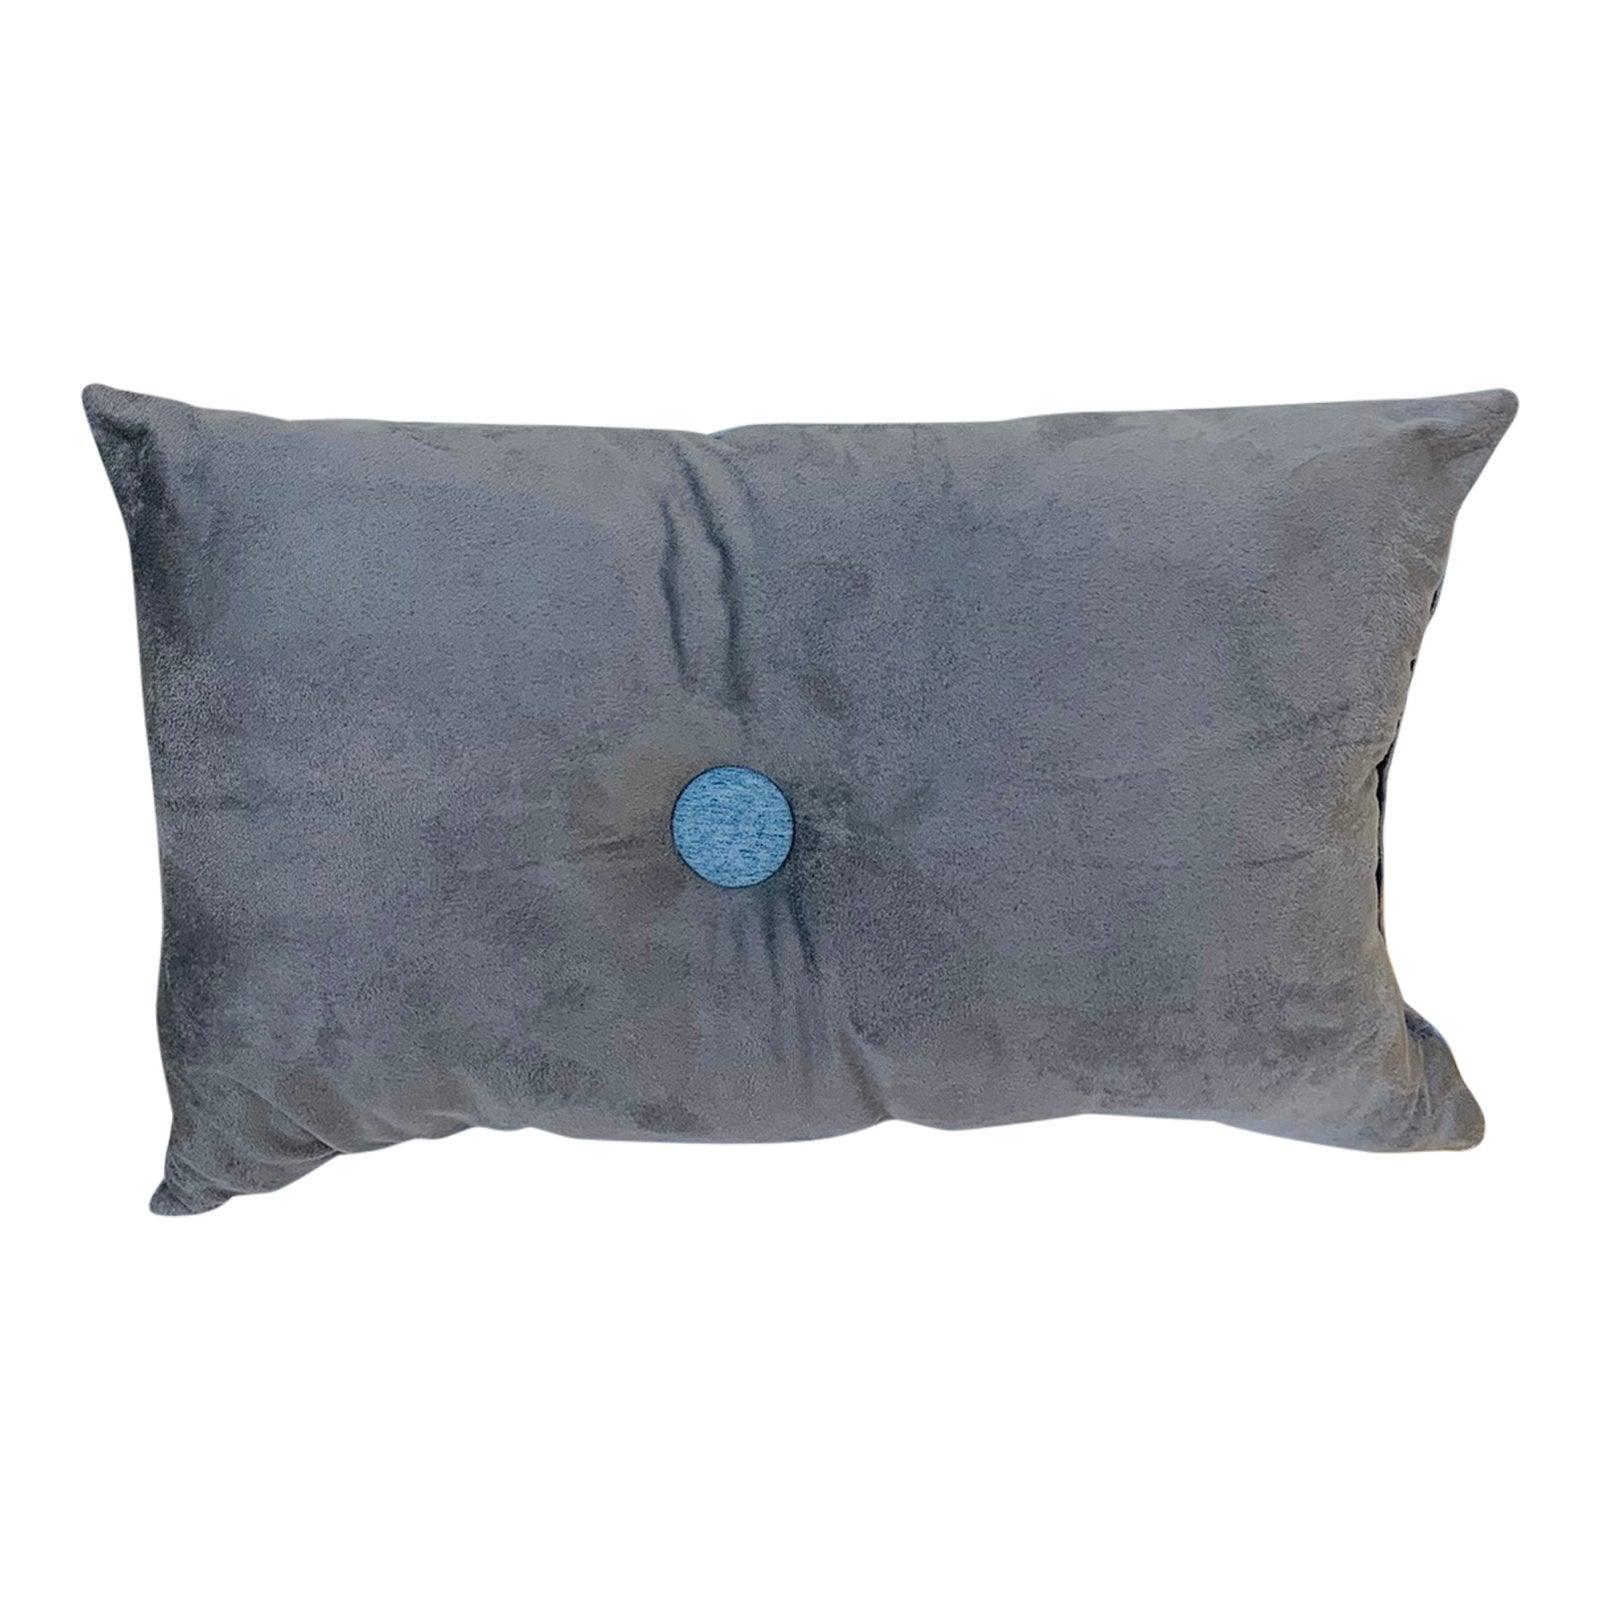 Double Side Rectangular Scatter Cushion Grey 45cm-Throw Pillows